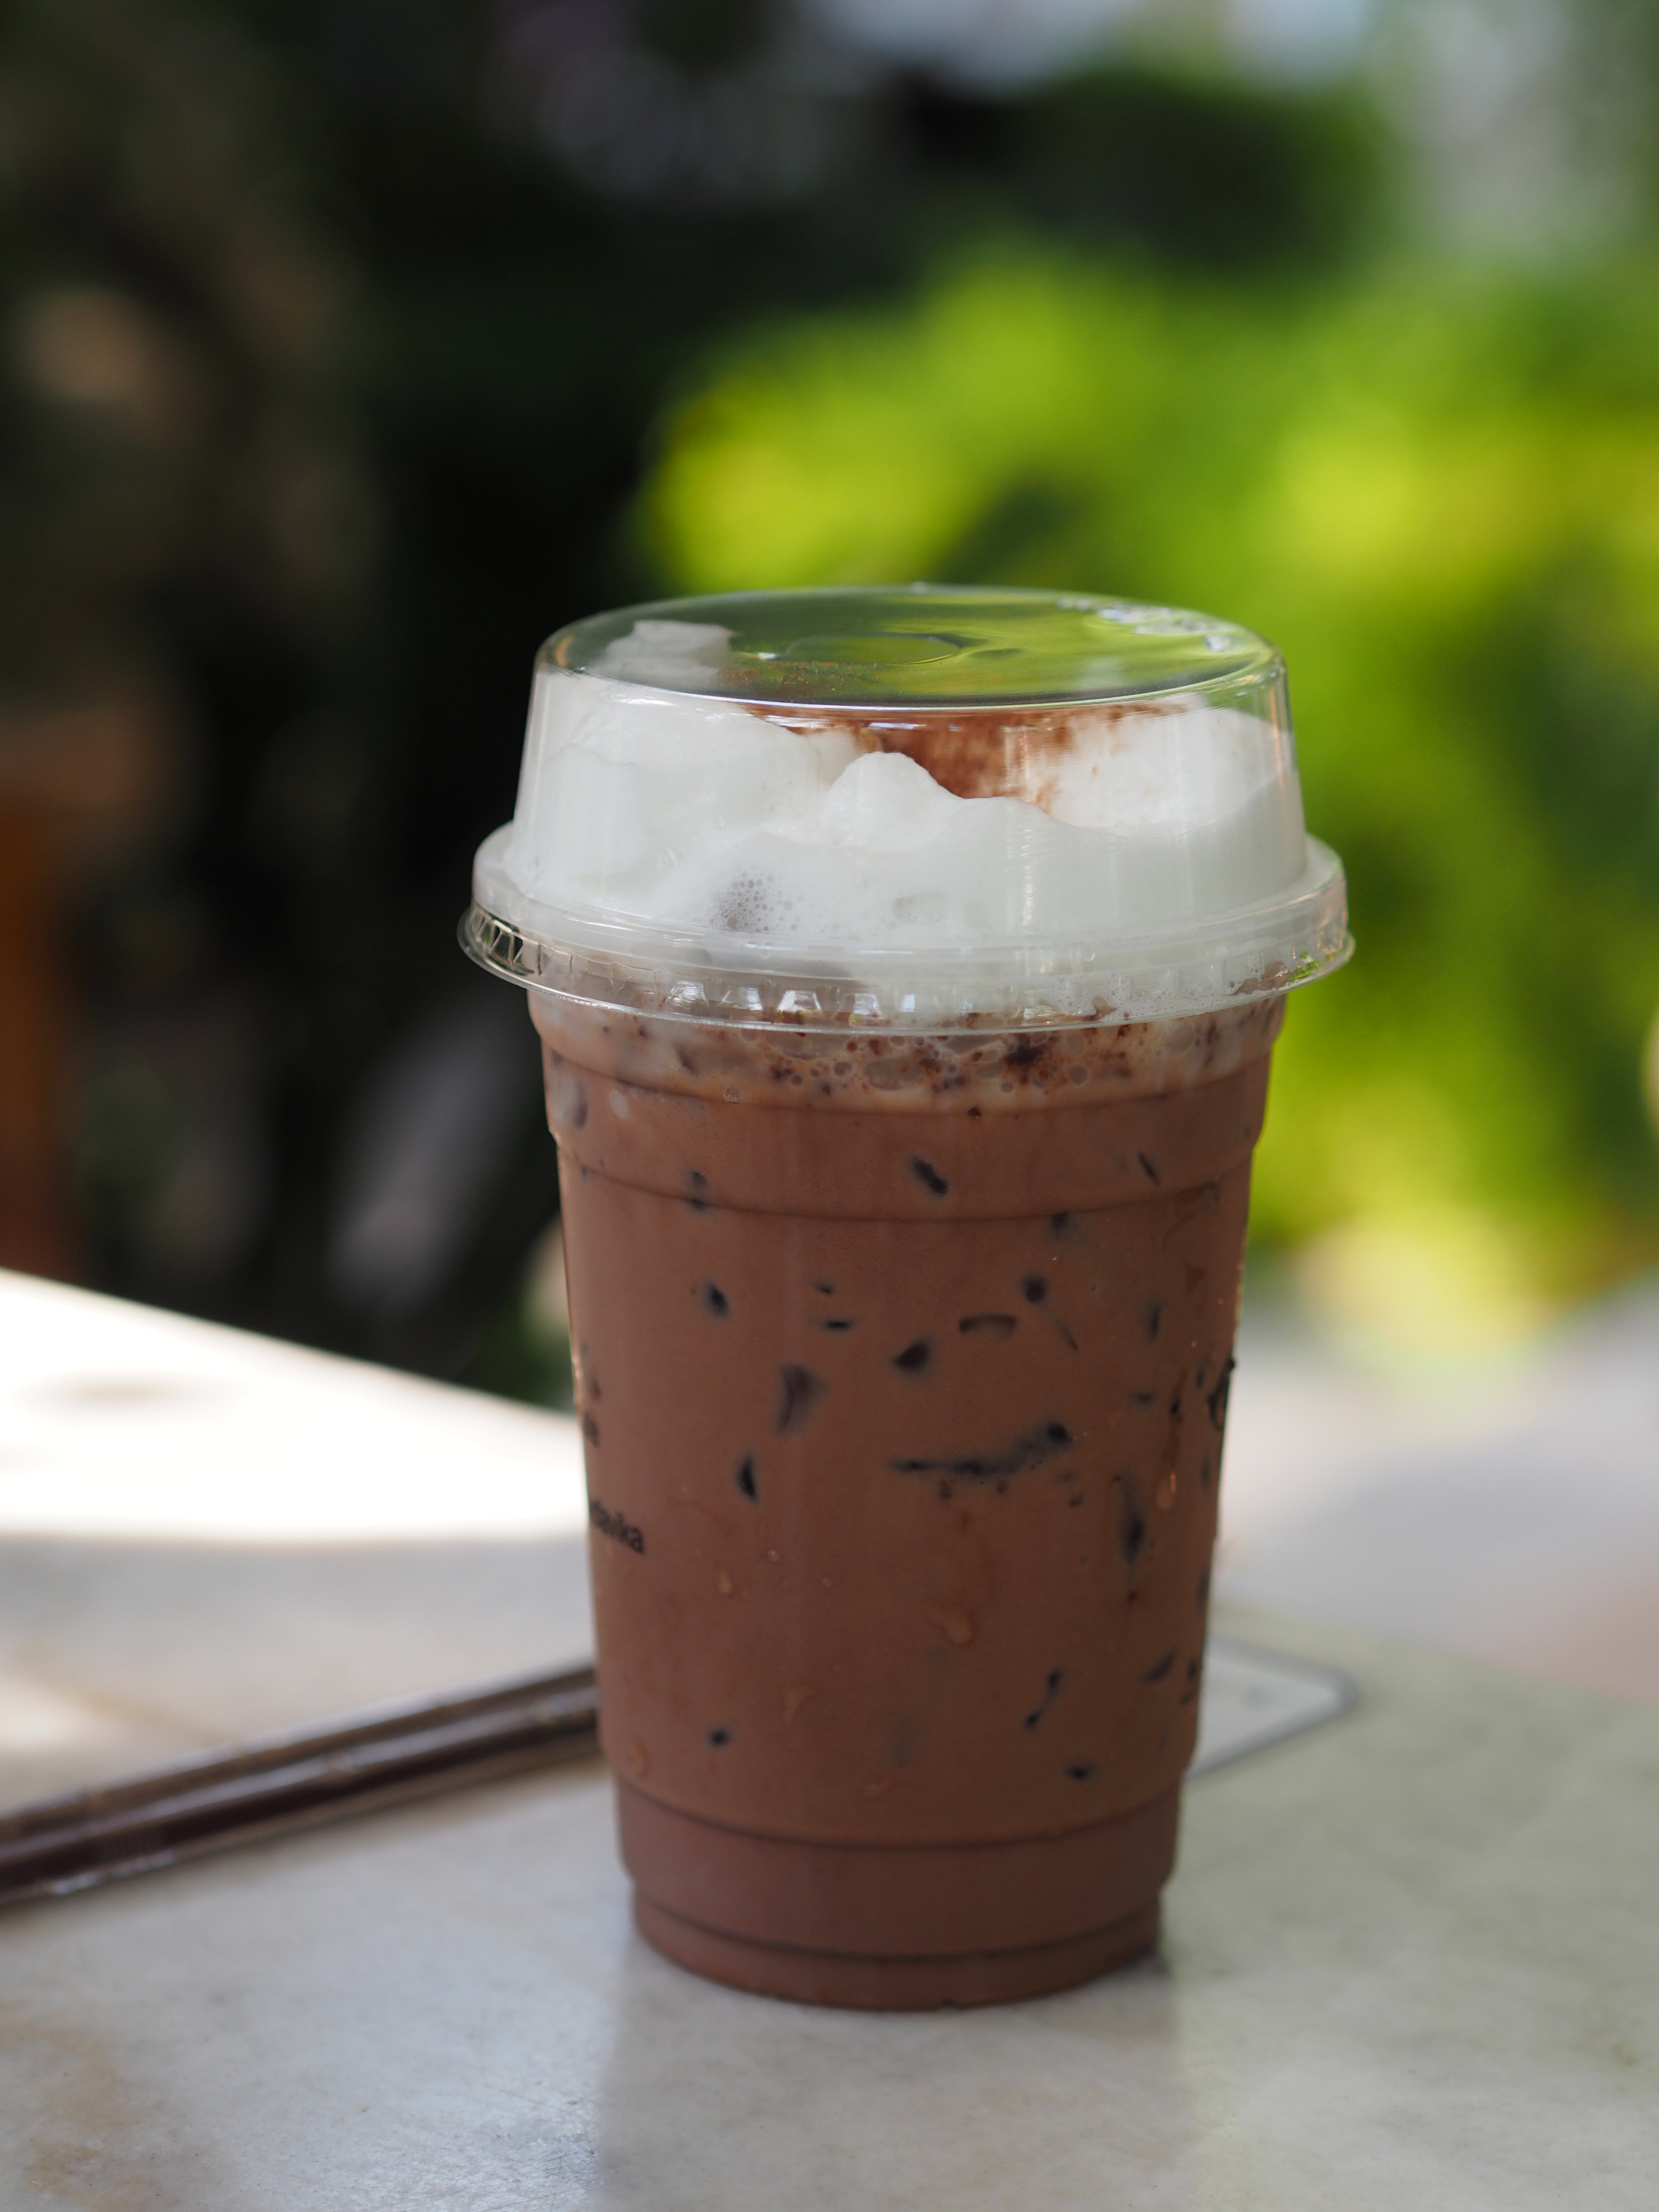 Iced chocolate drink with whipped cream in a clear cup, outdoors on a table with a blurred natural background